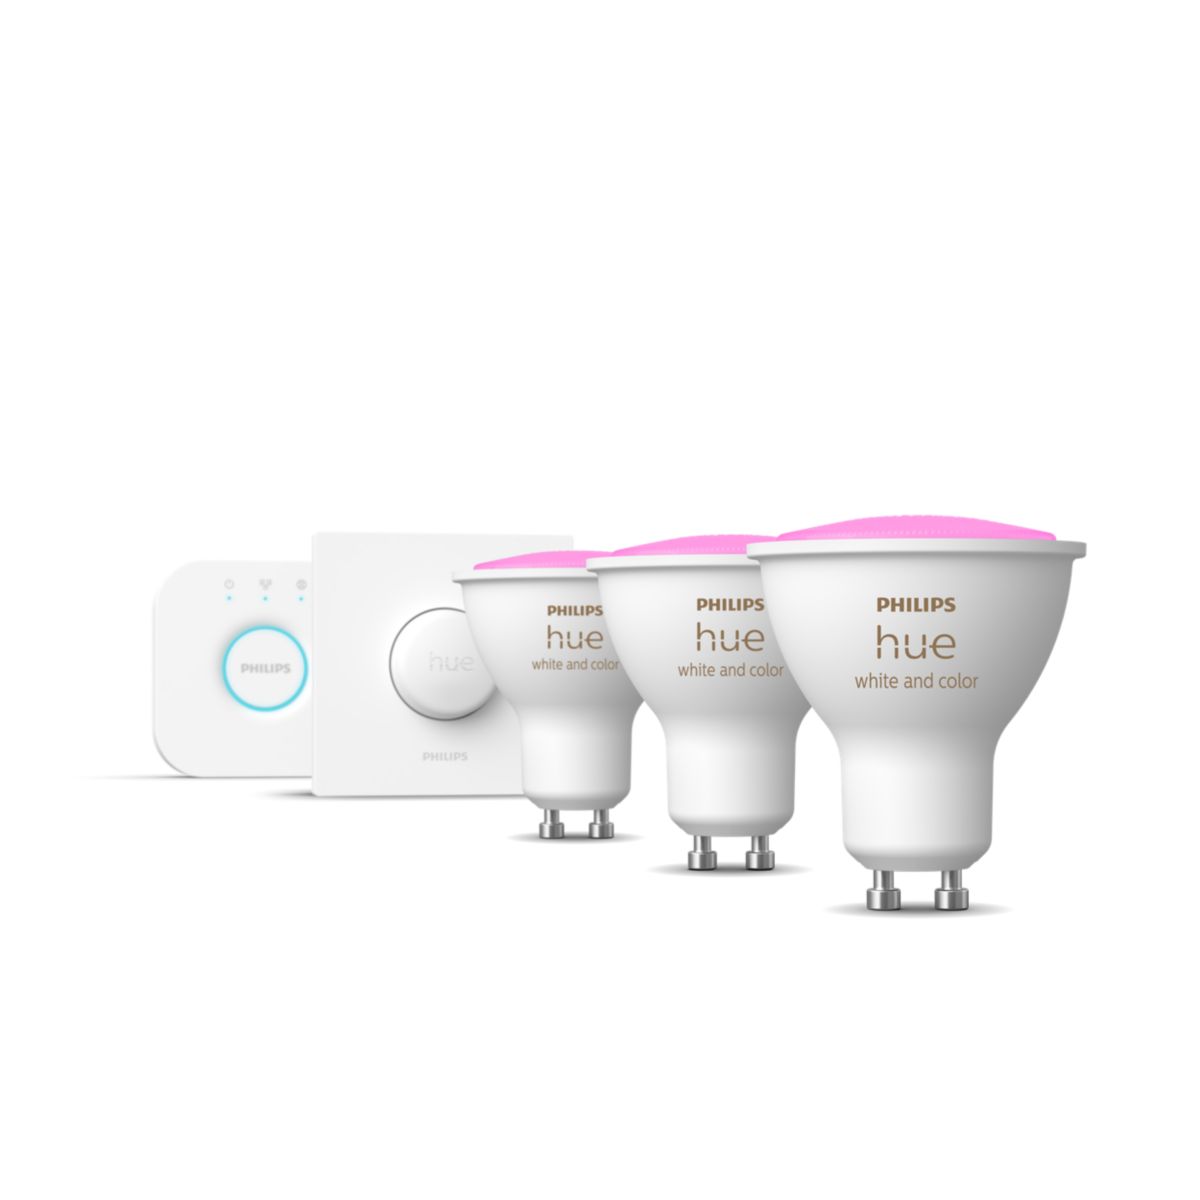 Philips Hue starterkit gu10 white and color ambiance 3x + smart button